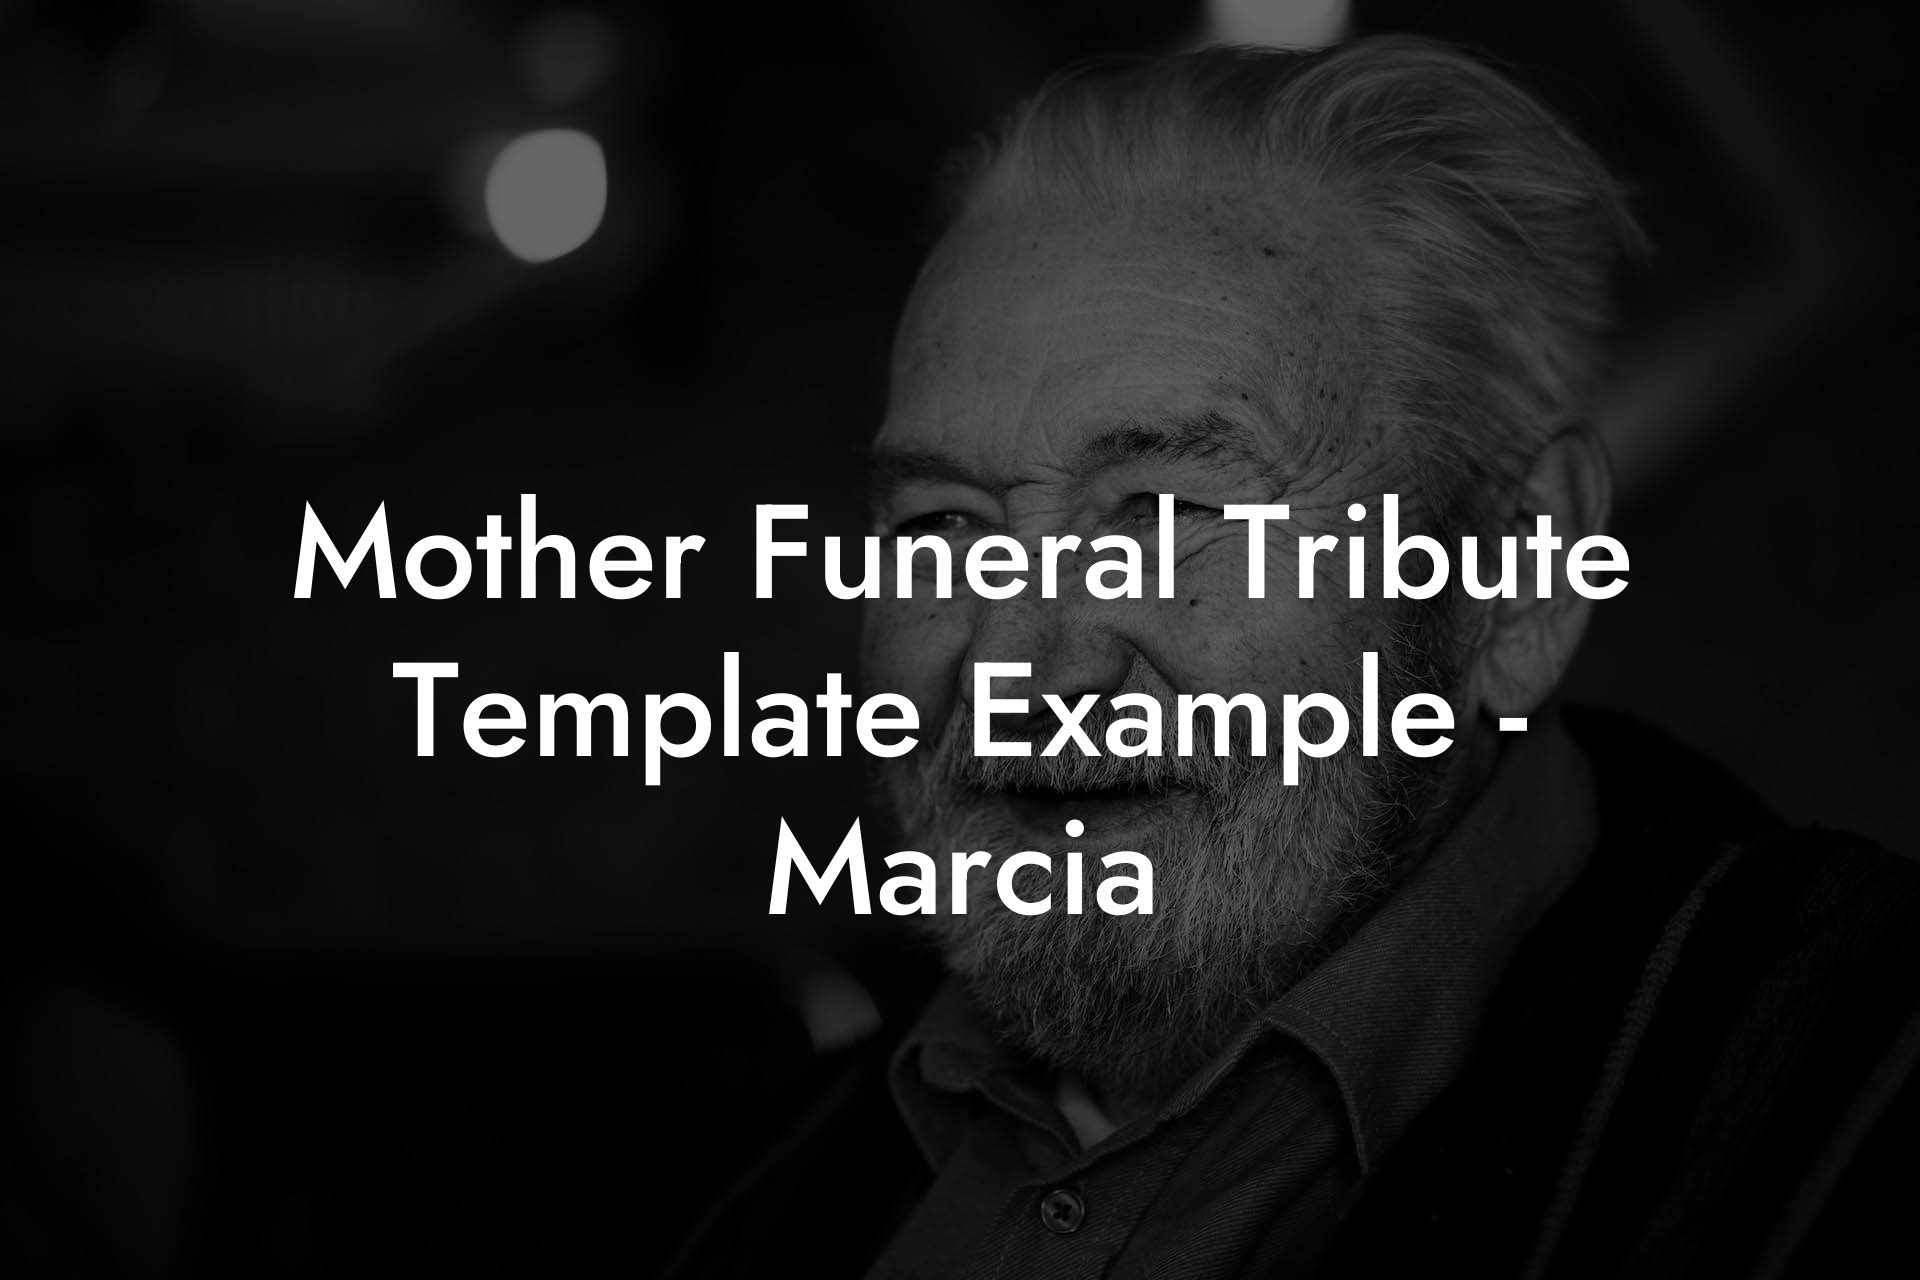 Mother Funeral Tribute Template Example - Marcia